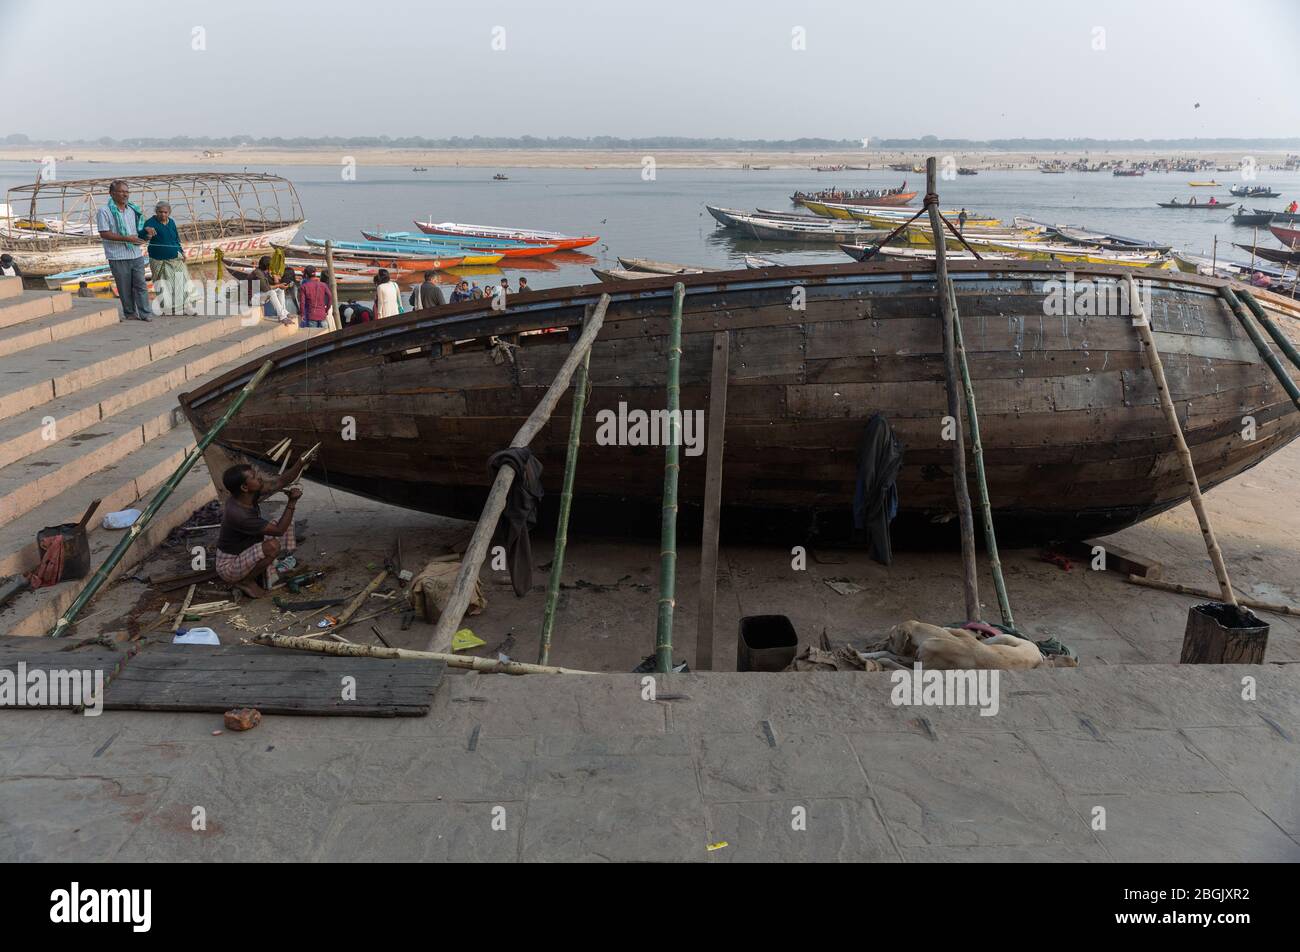 A shipwright builds a boat for a living near Ganges river bank in Varanasi, India Stock Photo